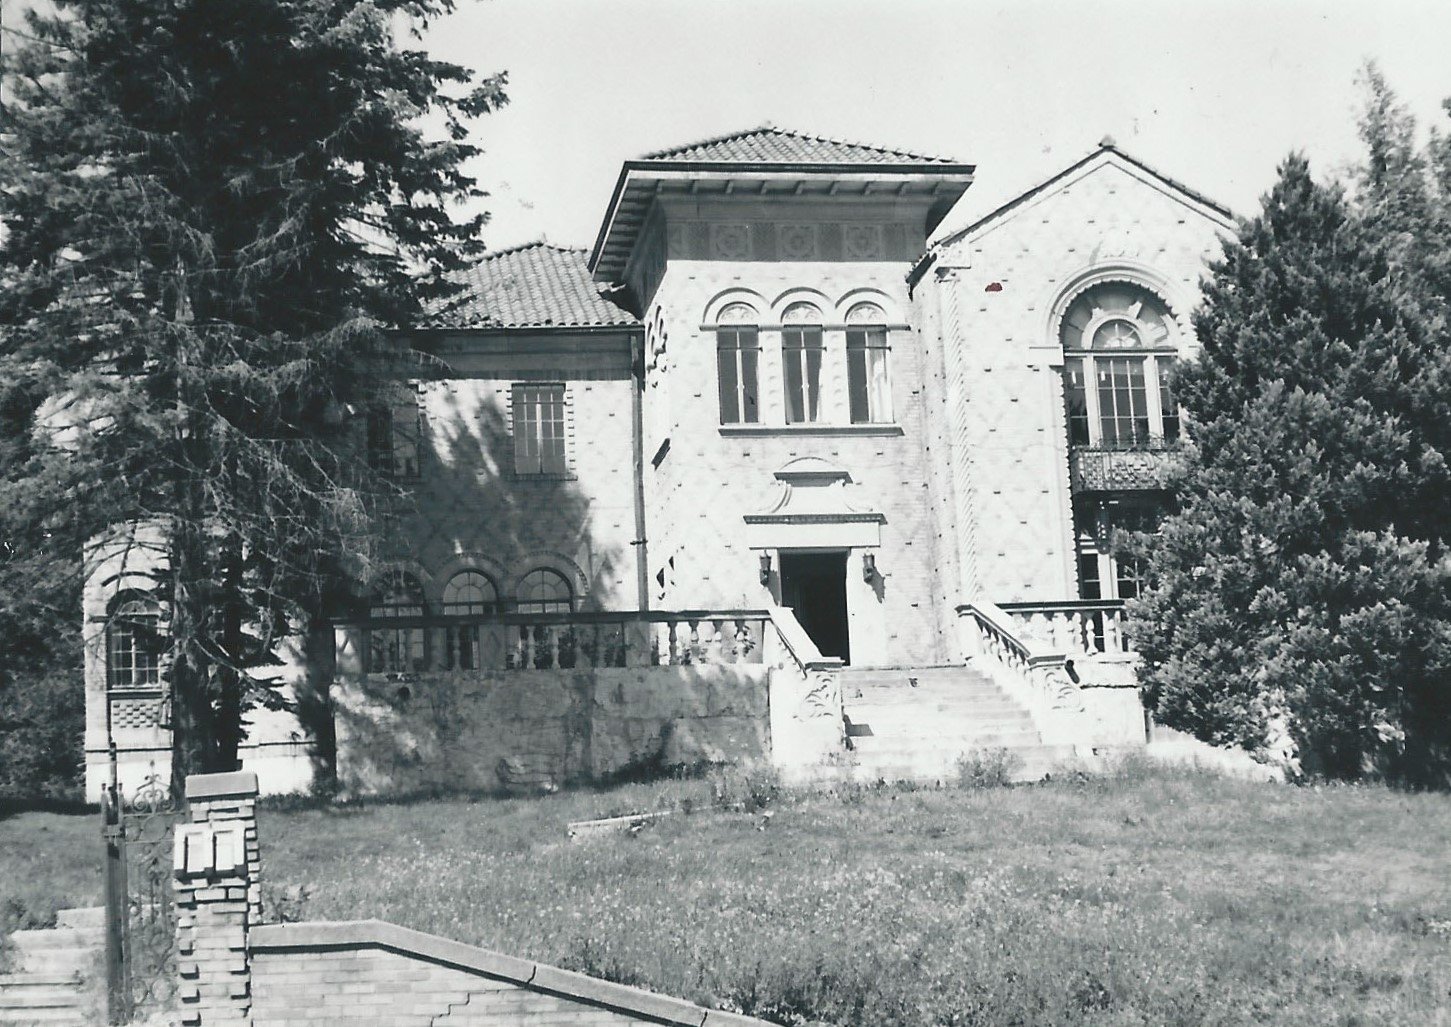 Glory days: The Castle was built in the early 1930s by Benjamin Yeager, who owned an oil company in Liberty. This is a 1960s-era photo of the house.